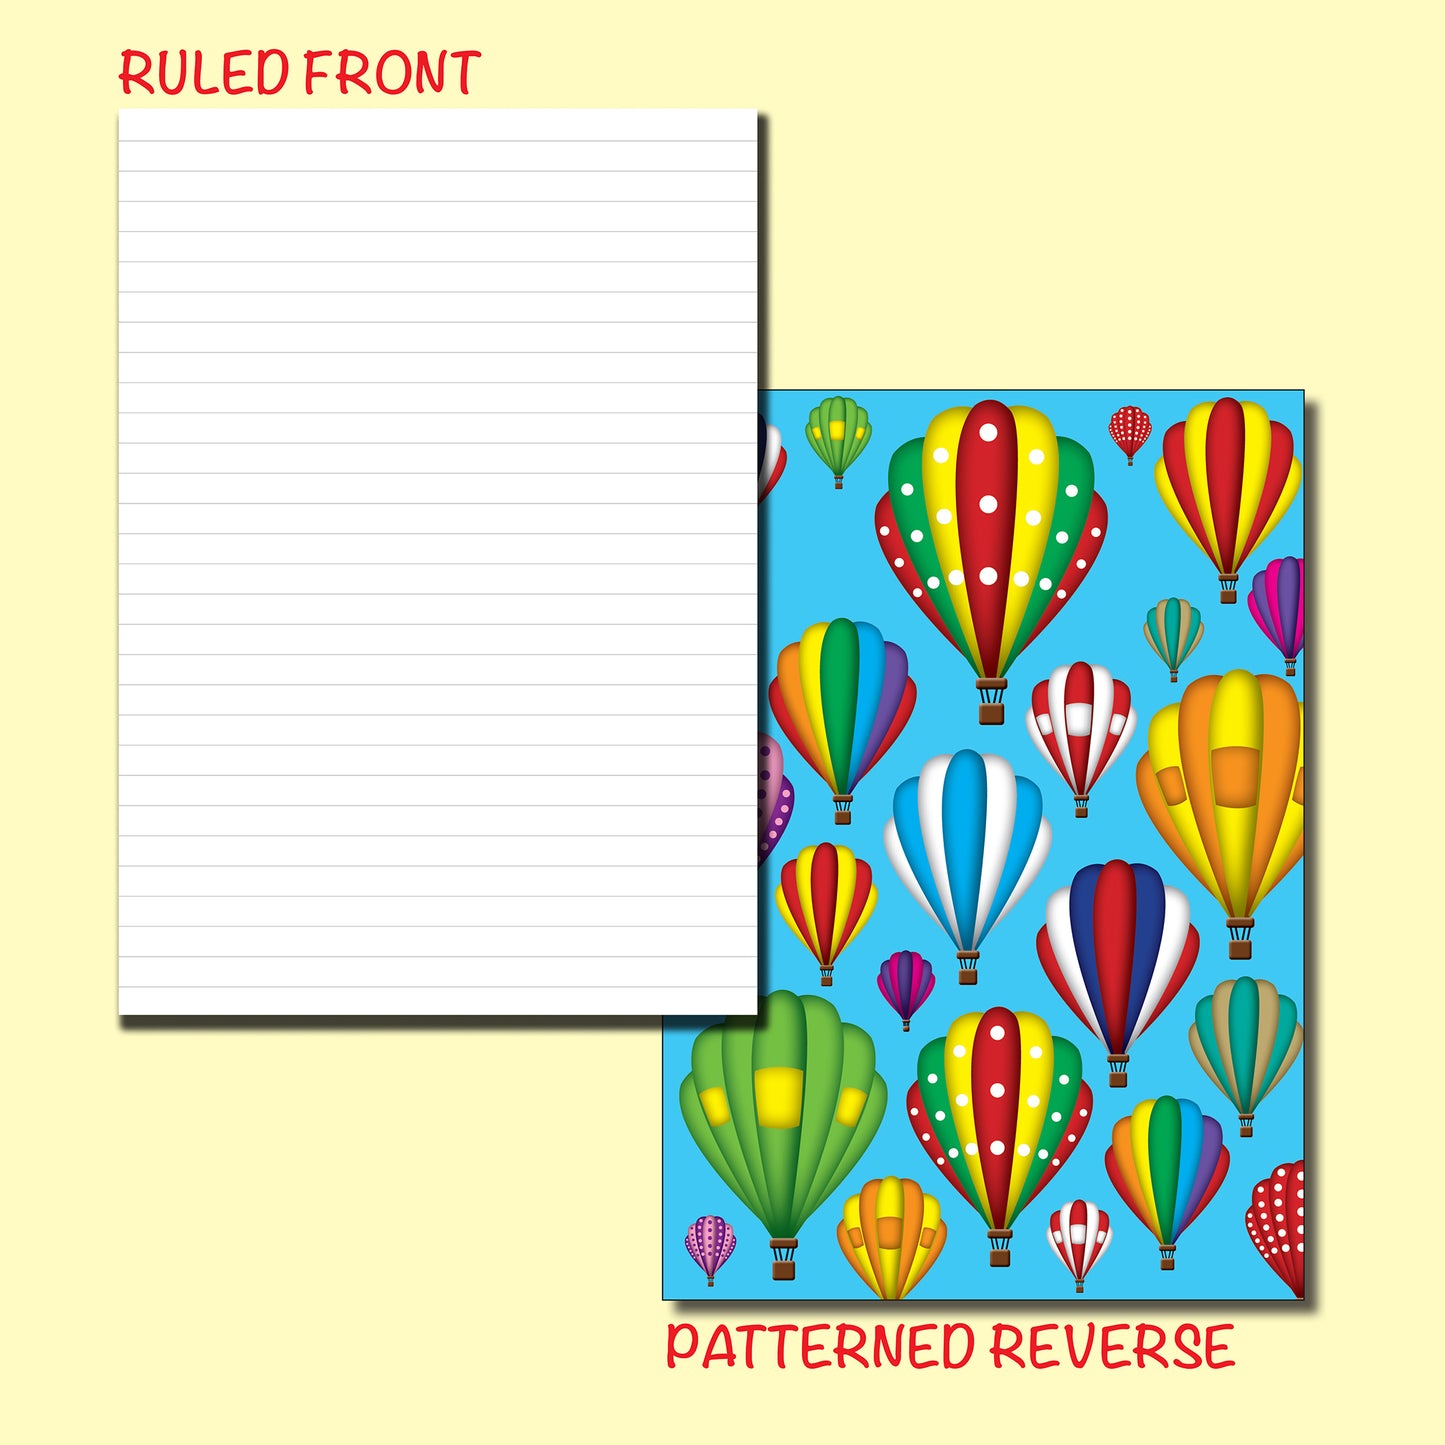 Luxury Ruled Writing Pad A5 120gsm 50 pages Printed reverse